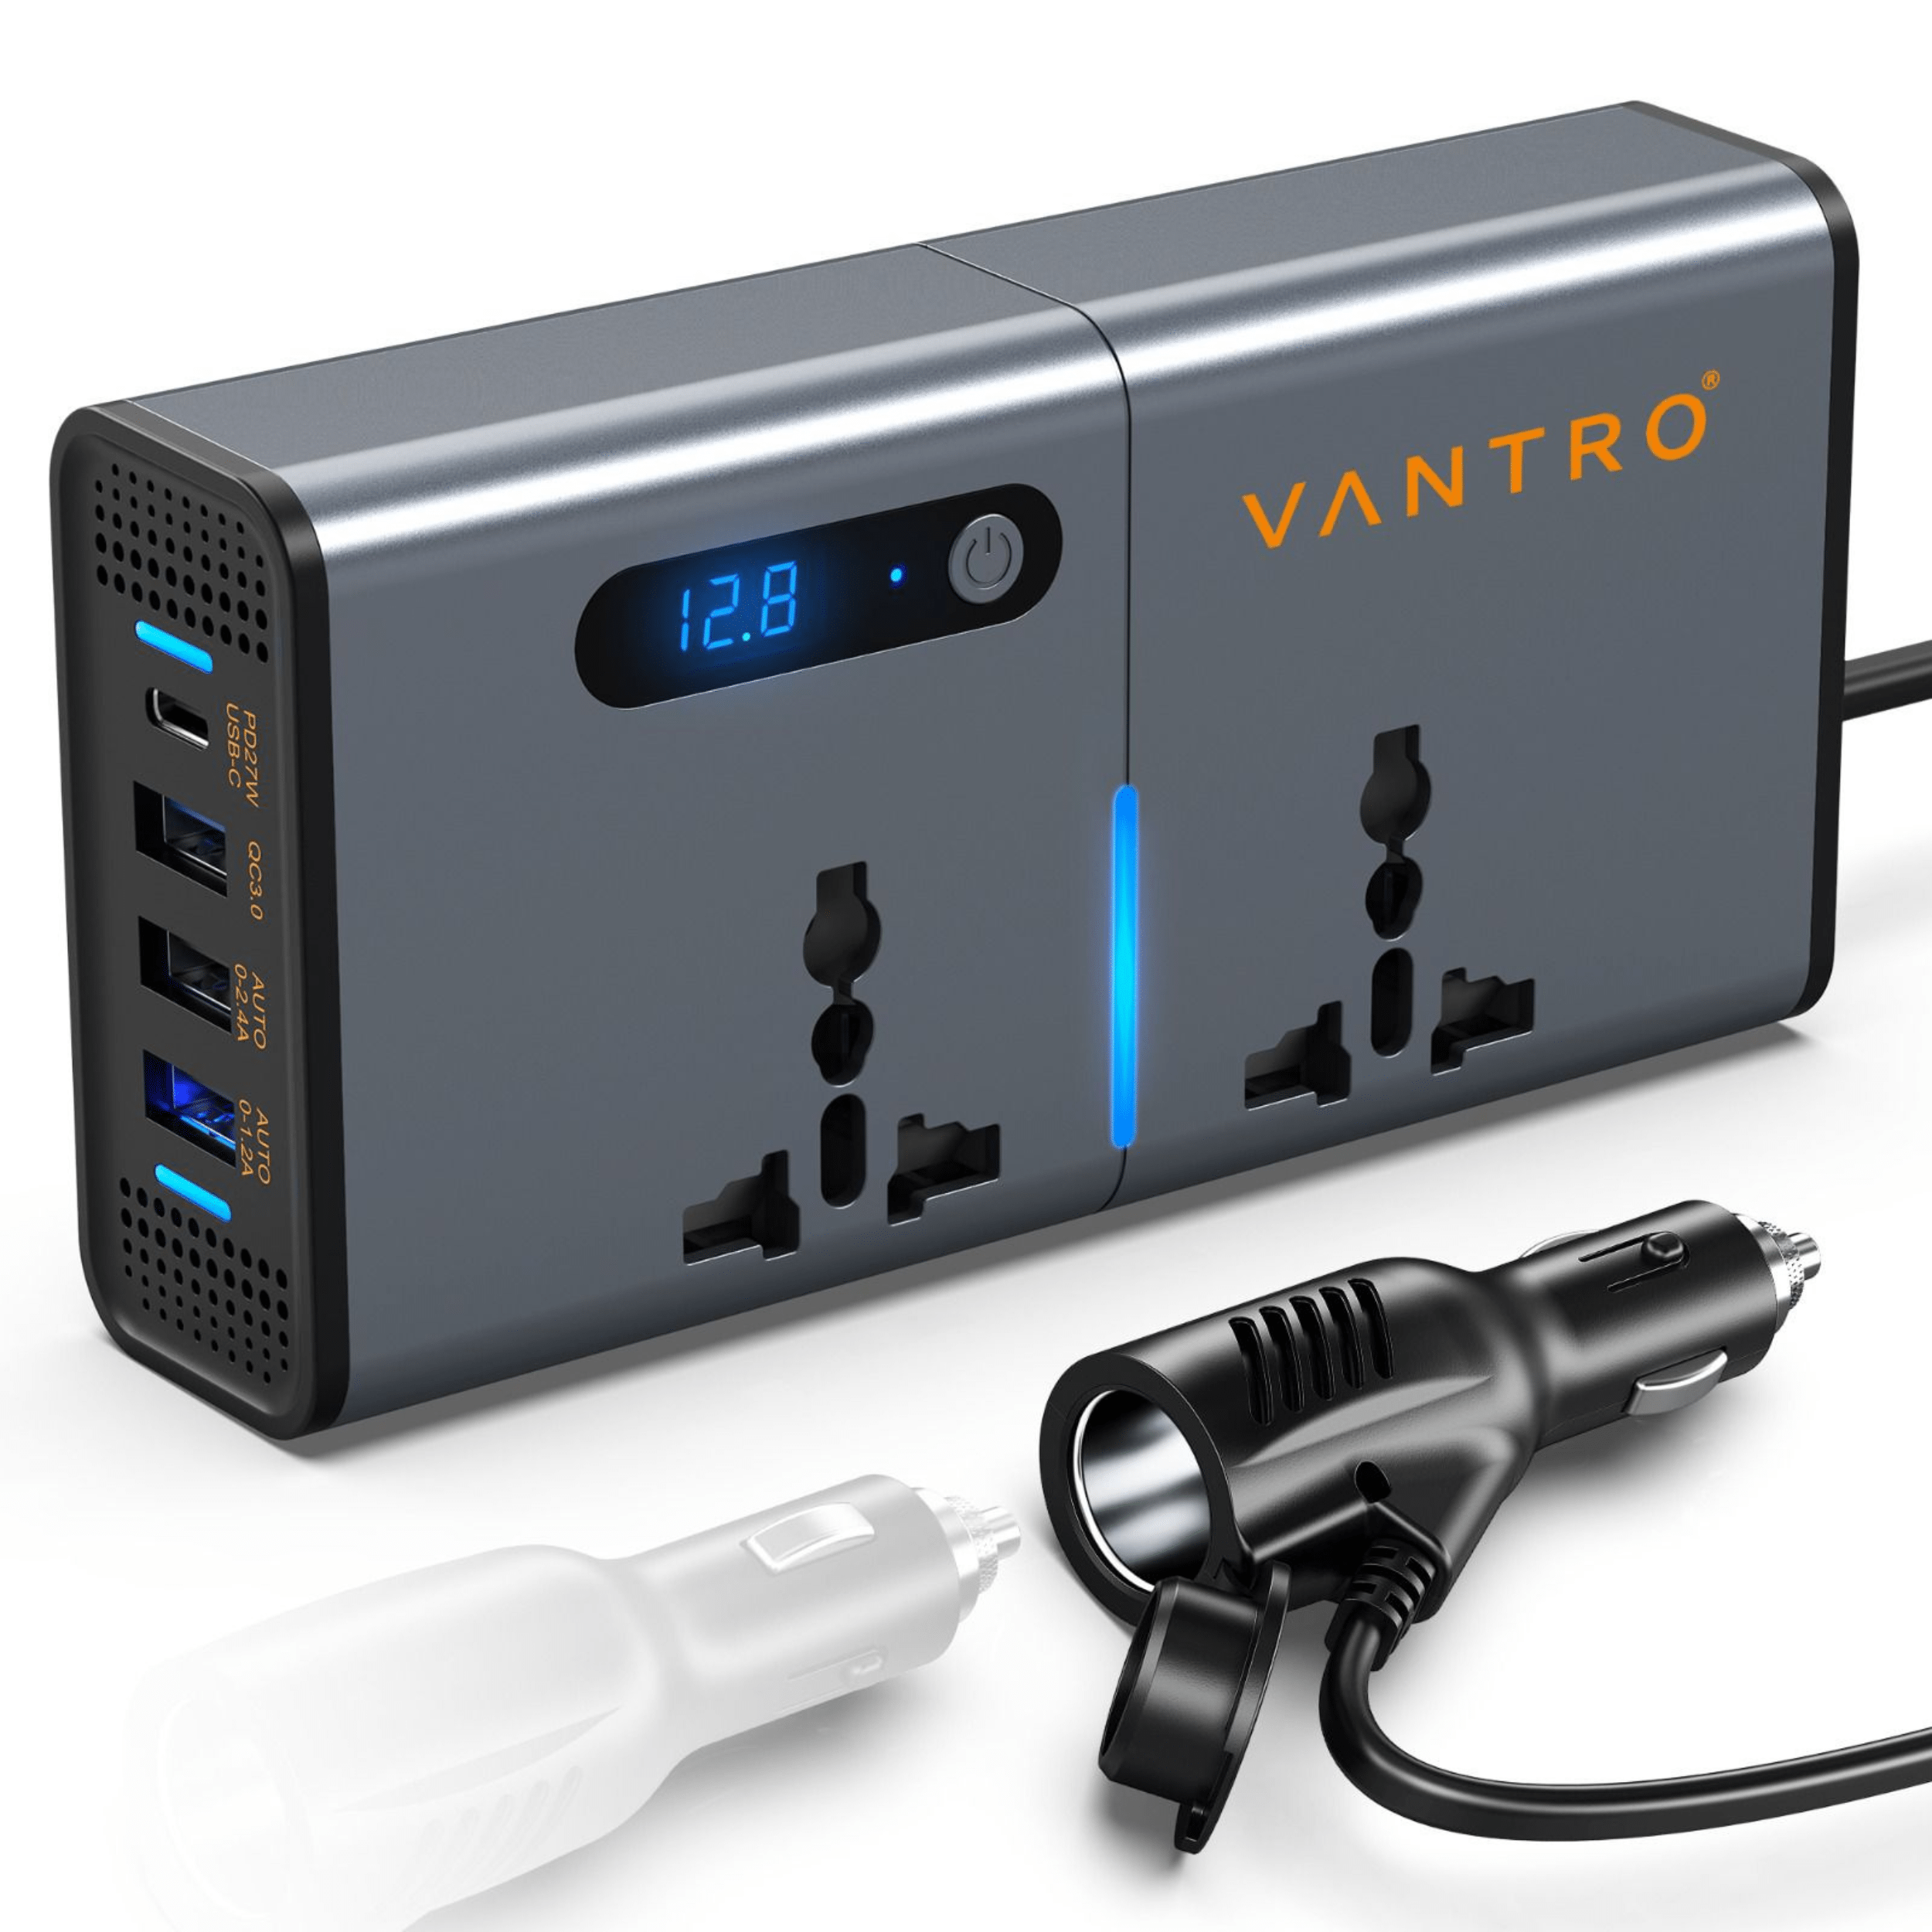 Vantro 200W Car Power Inverter Newly Car Plug Adapter Outlet Charger DC 12V-24V  to 220V Car Inverter with 1.2A&2.4A USB, 1 QC3.0 USB and 1 Type C Ports (12V-24V)  - Vantro